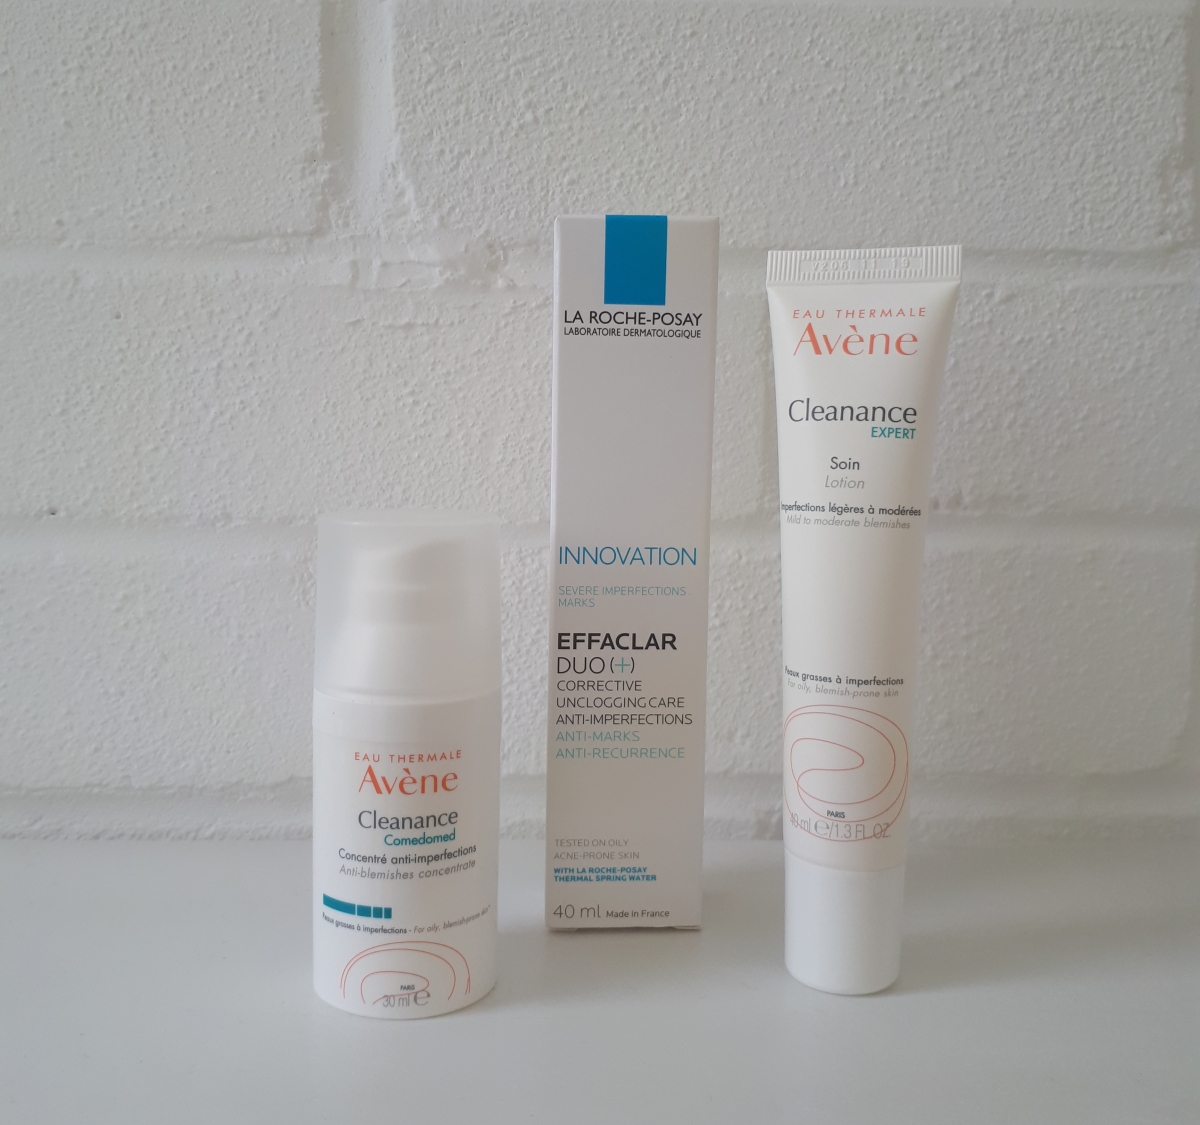 La Roche Posay Effaclar Duo VS Avene Cleanance Expert & Cleanance Comedomed  – A Comparison Review Of Moisturisers For Acne Prone Skin – Forever Saving  For A Rainy Day